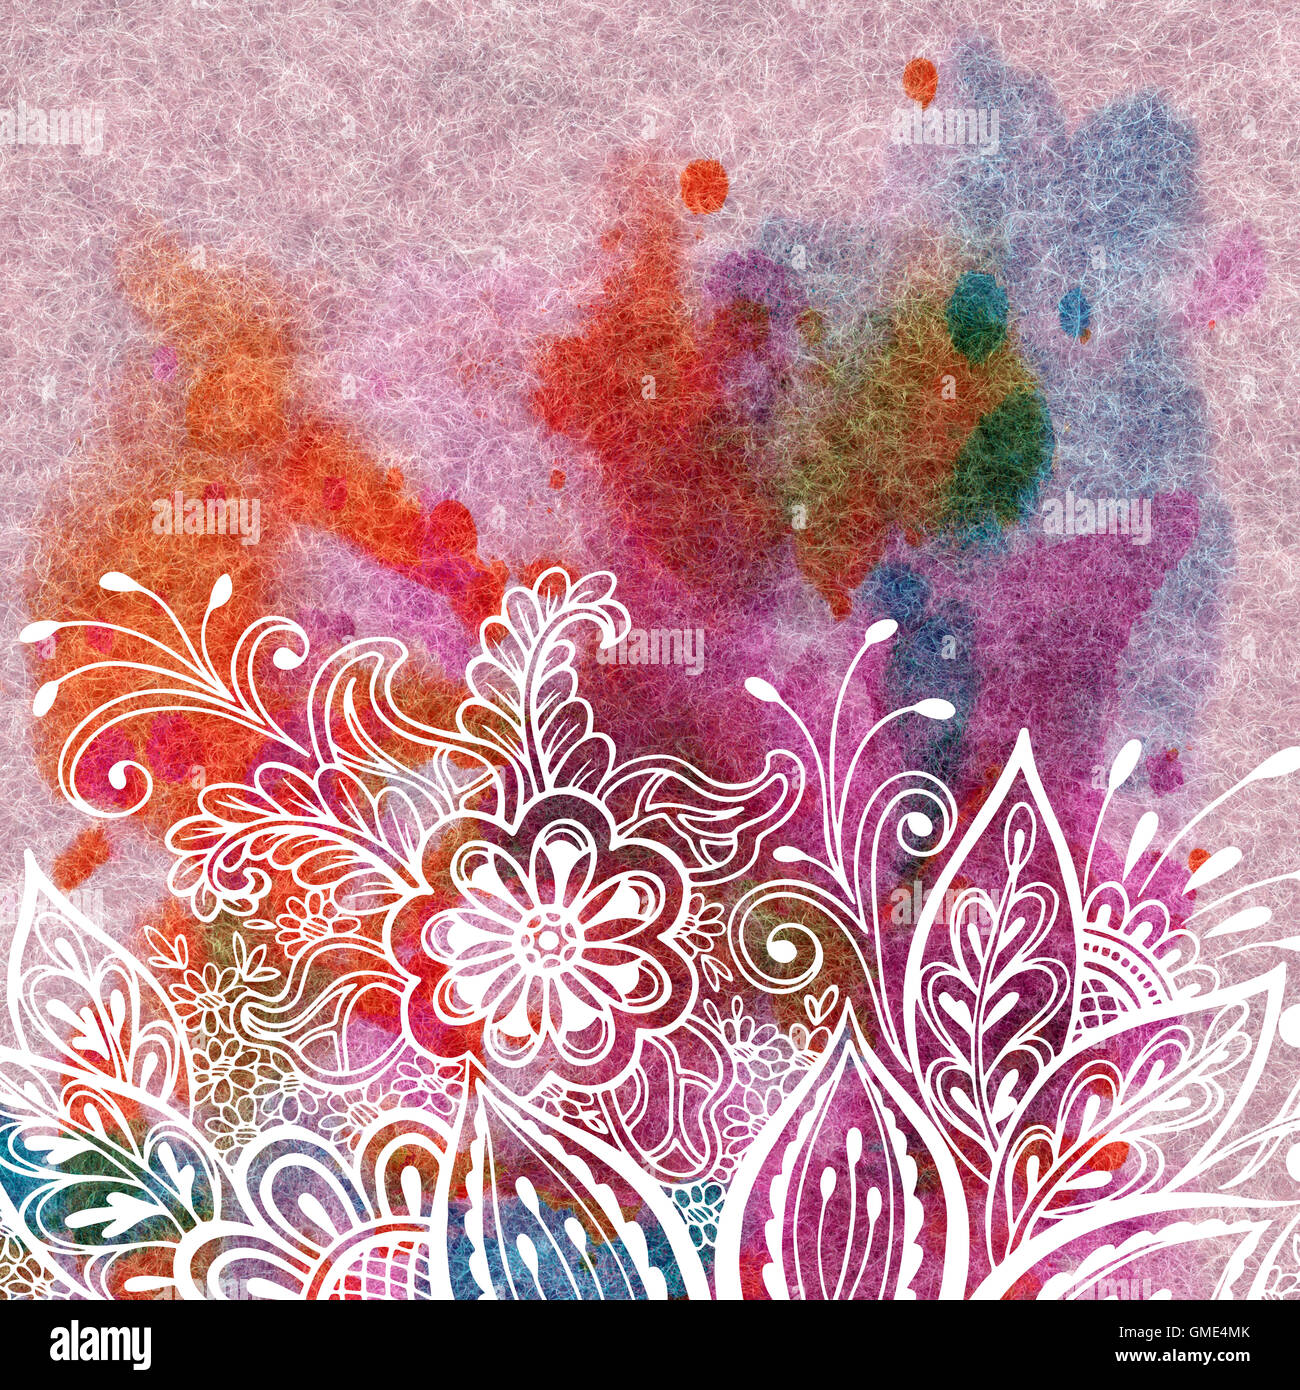 Floral Pattern on Watercolor Painting Stock Photo